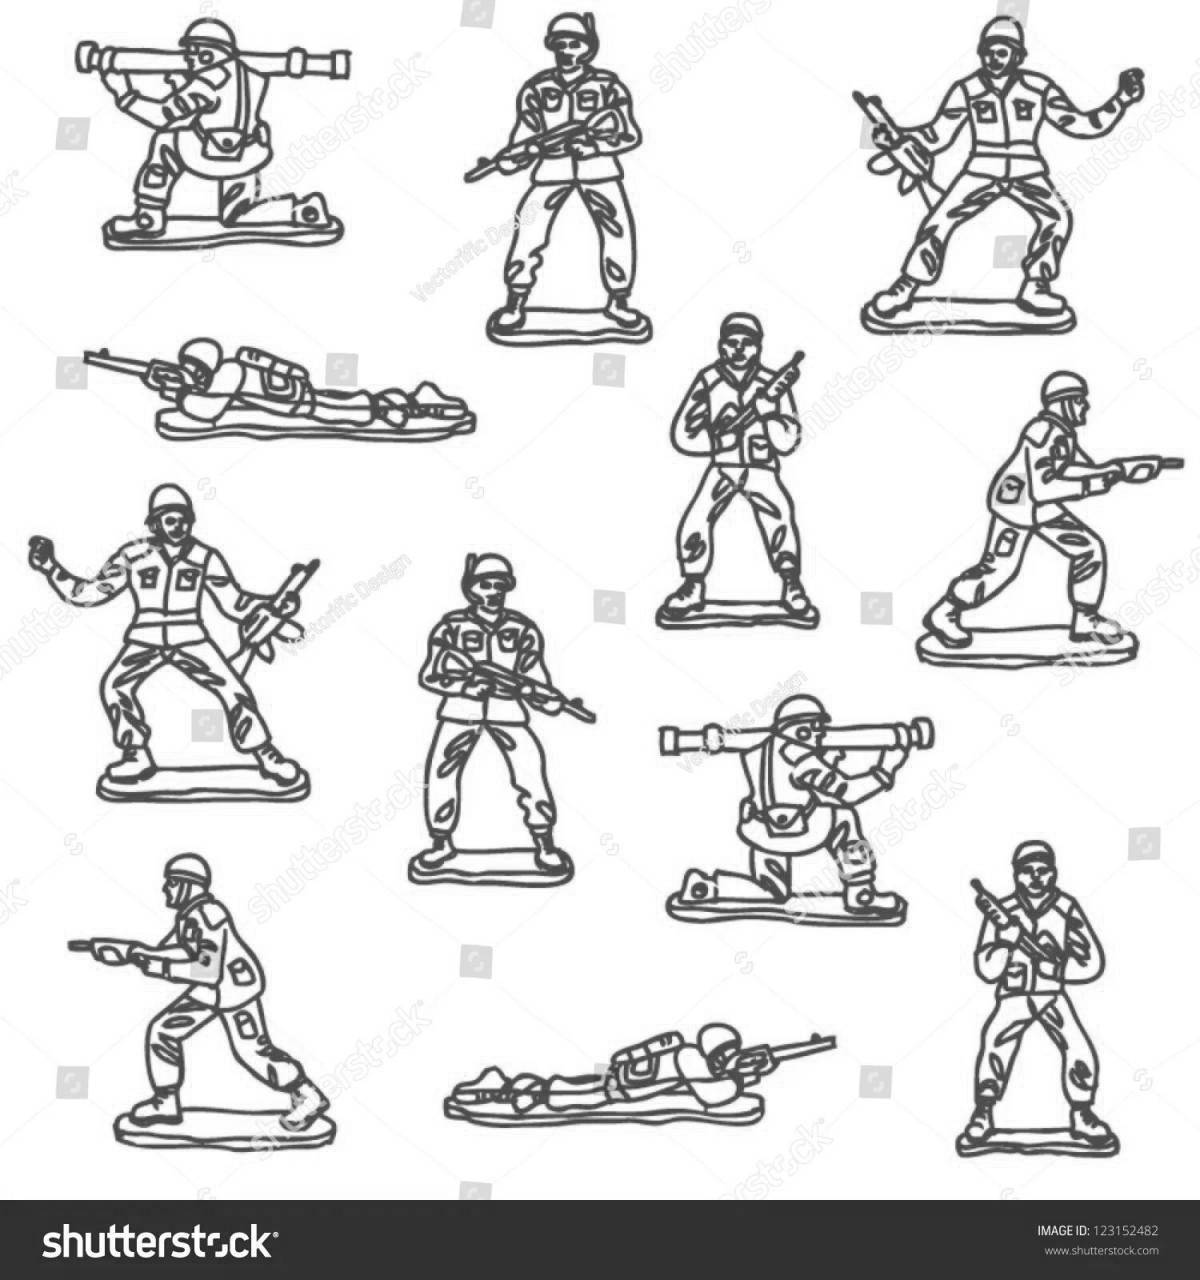 Magic toy soldiers coloring book for boys